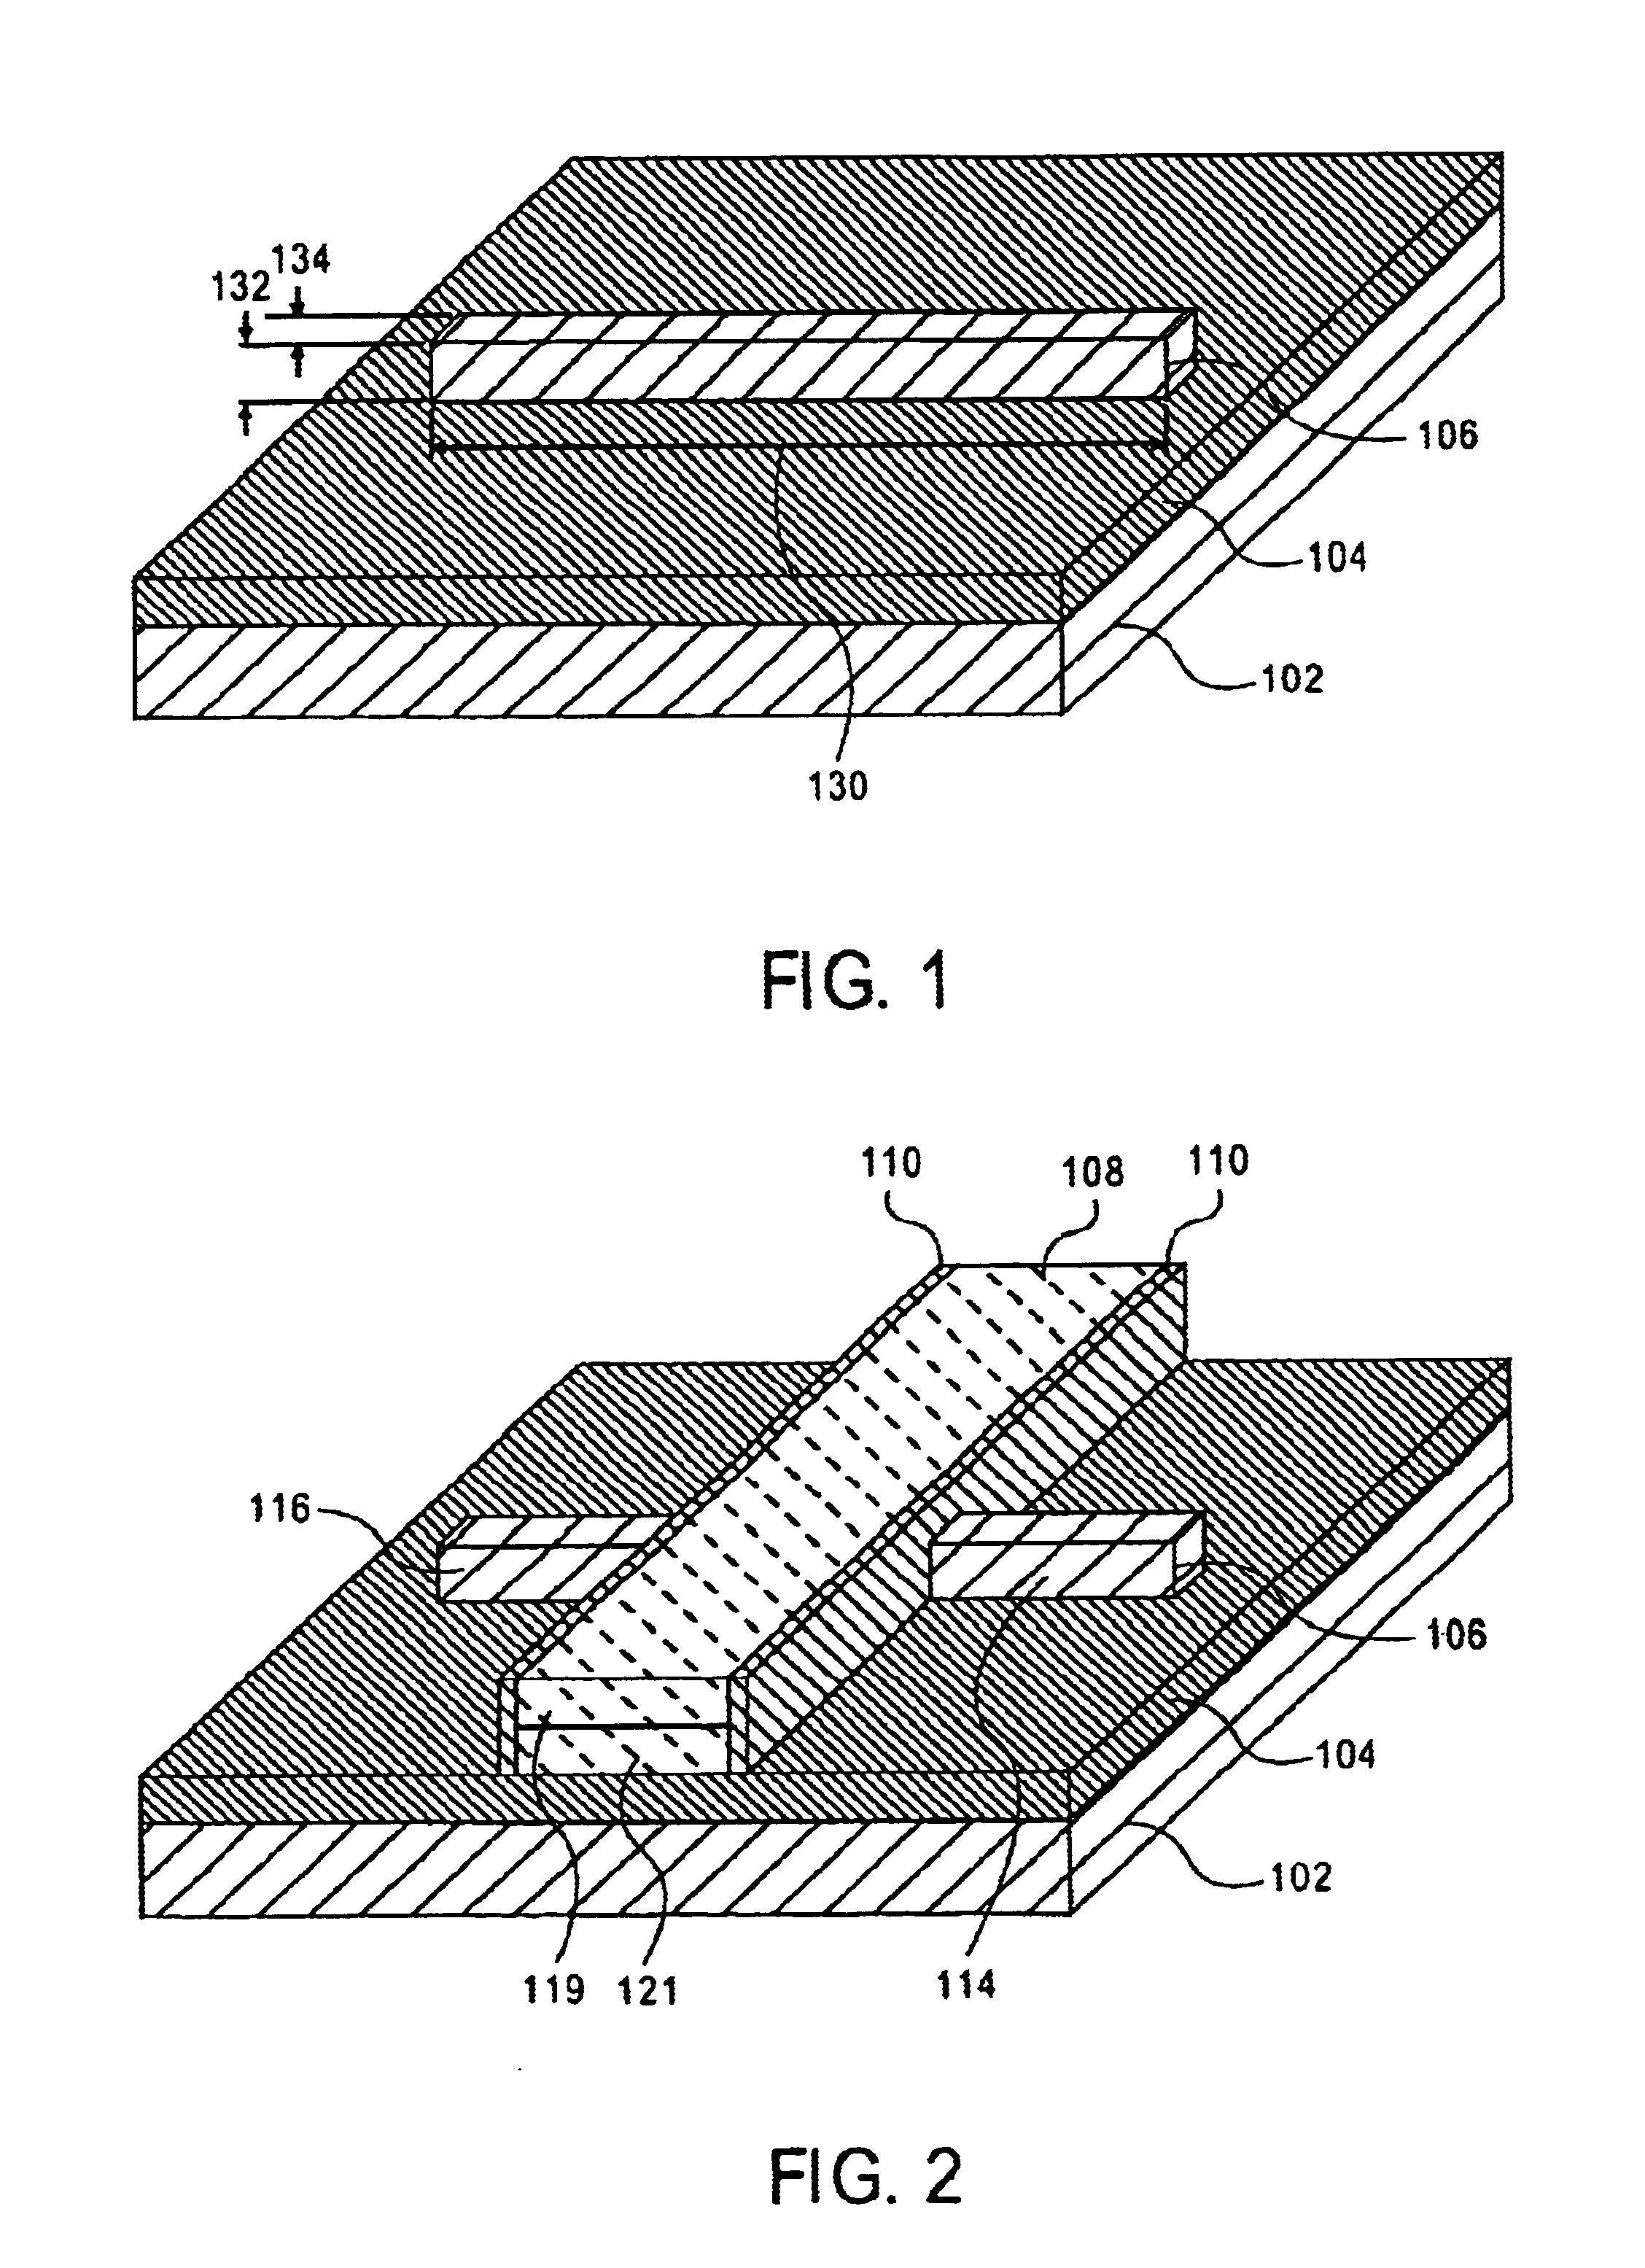 Method of fabricating an ultra-narrow channel semiconductor device